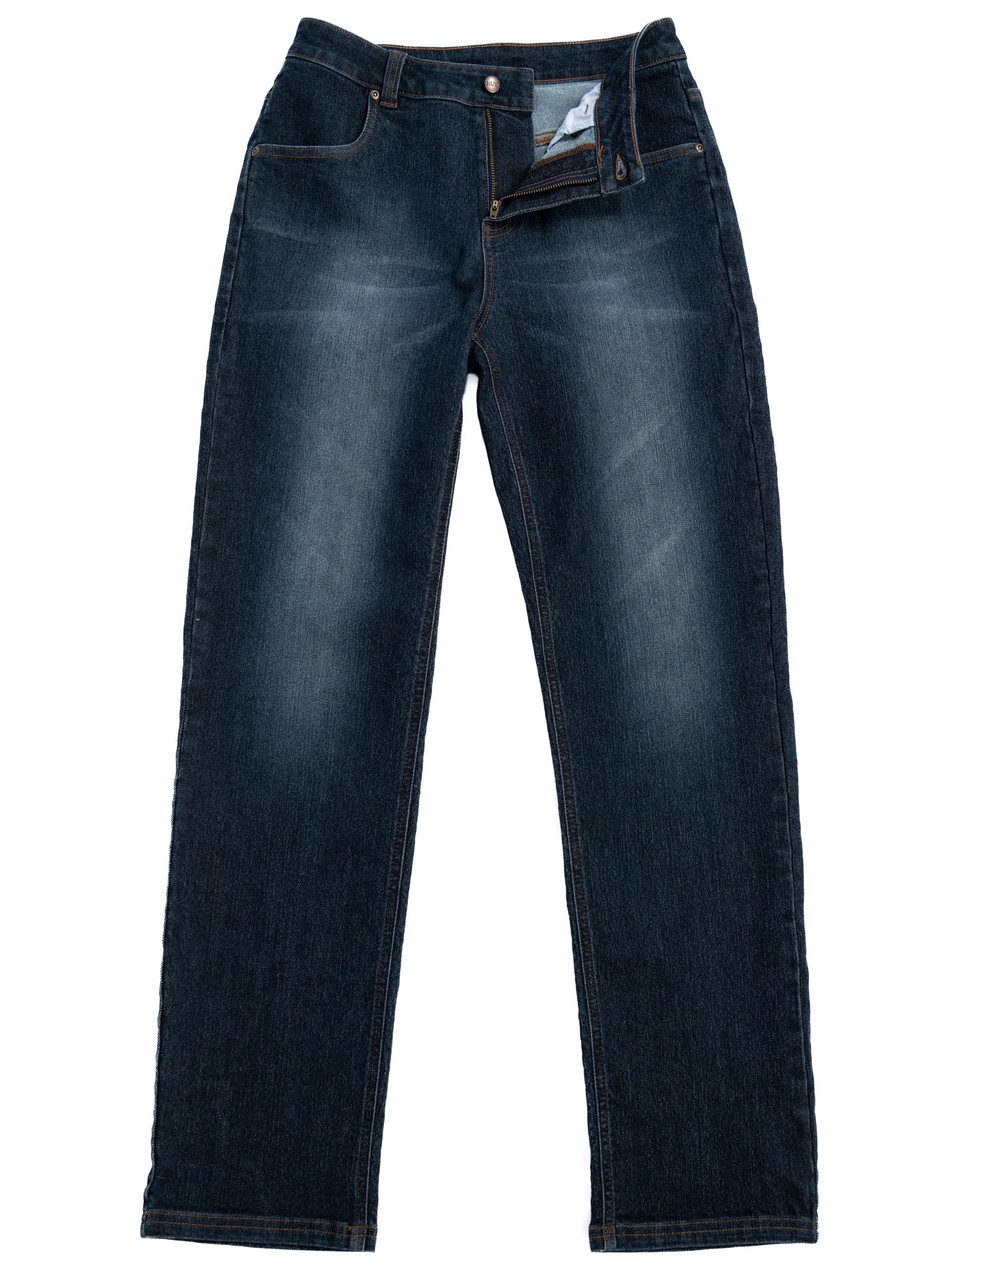 Shop for Straight Leg Jeans